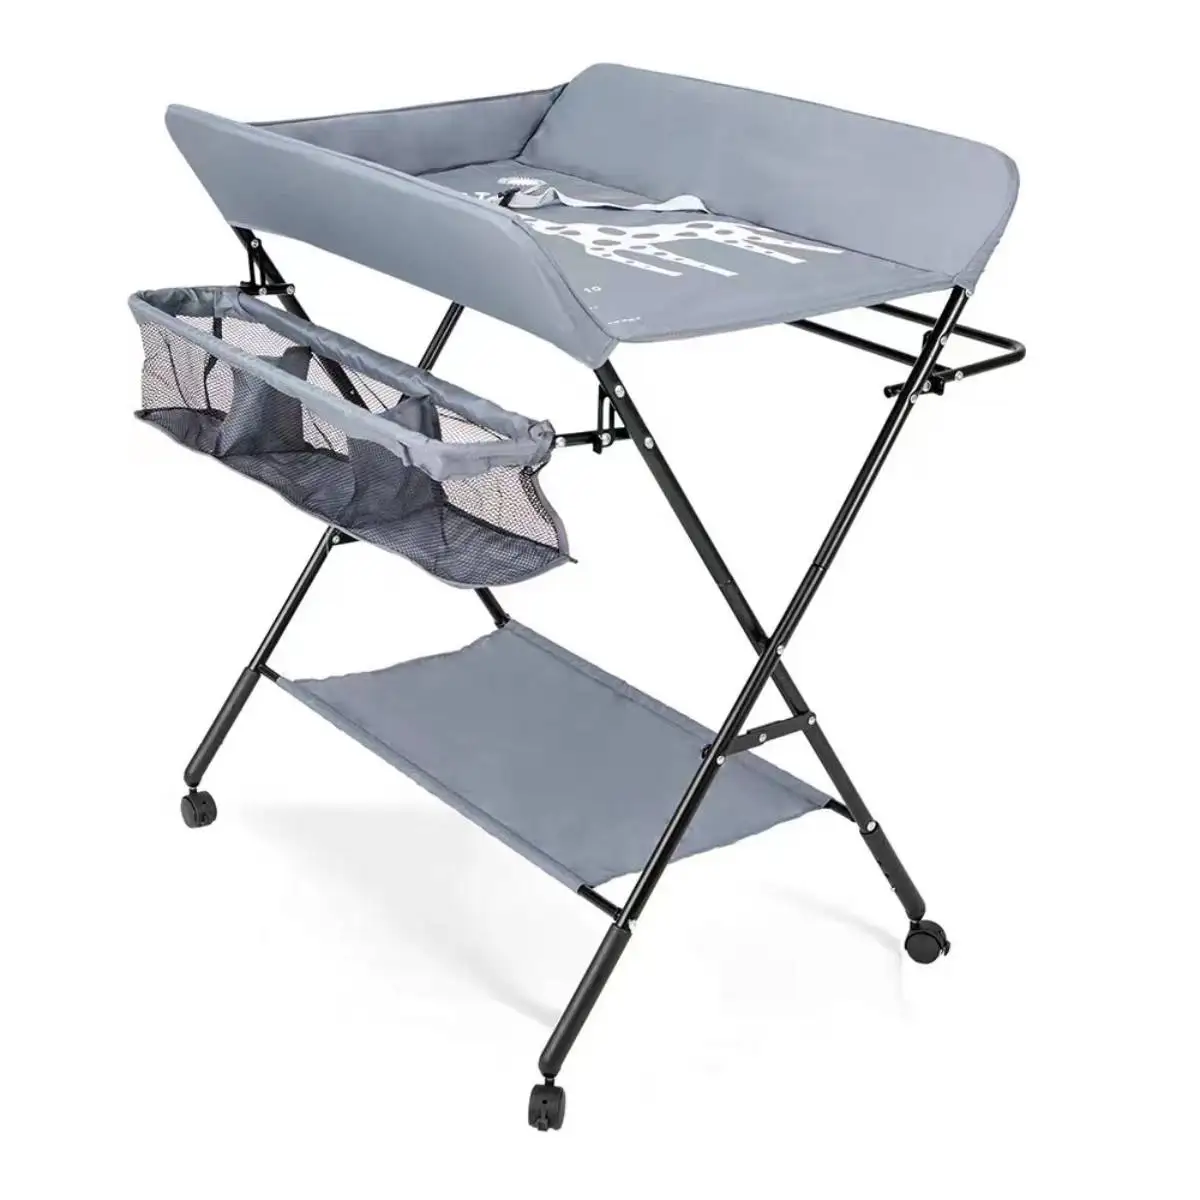 

Foldable diaper table for changing diapers; multifunctional mobile crib nursing table for newborn babies.